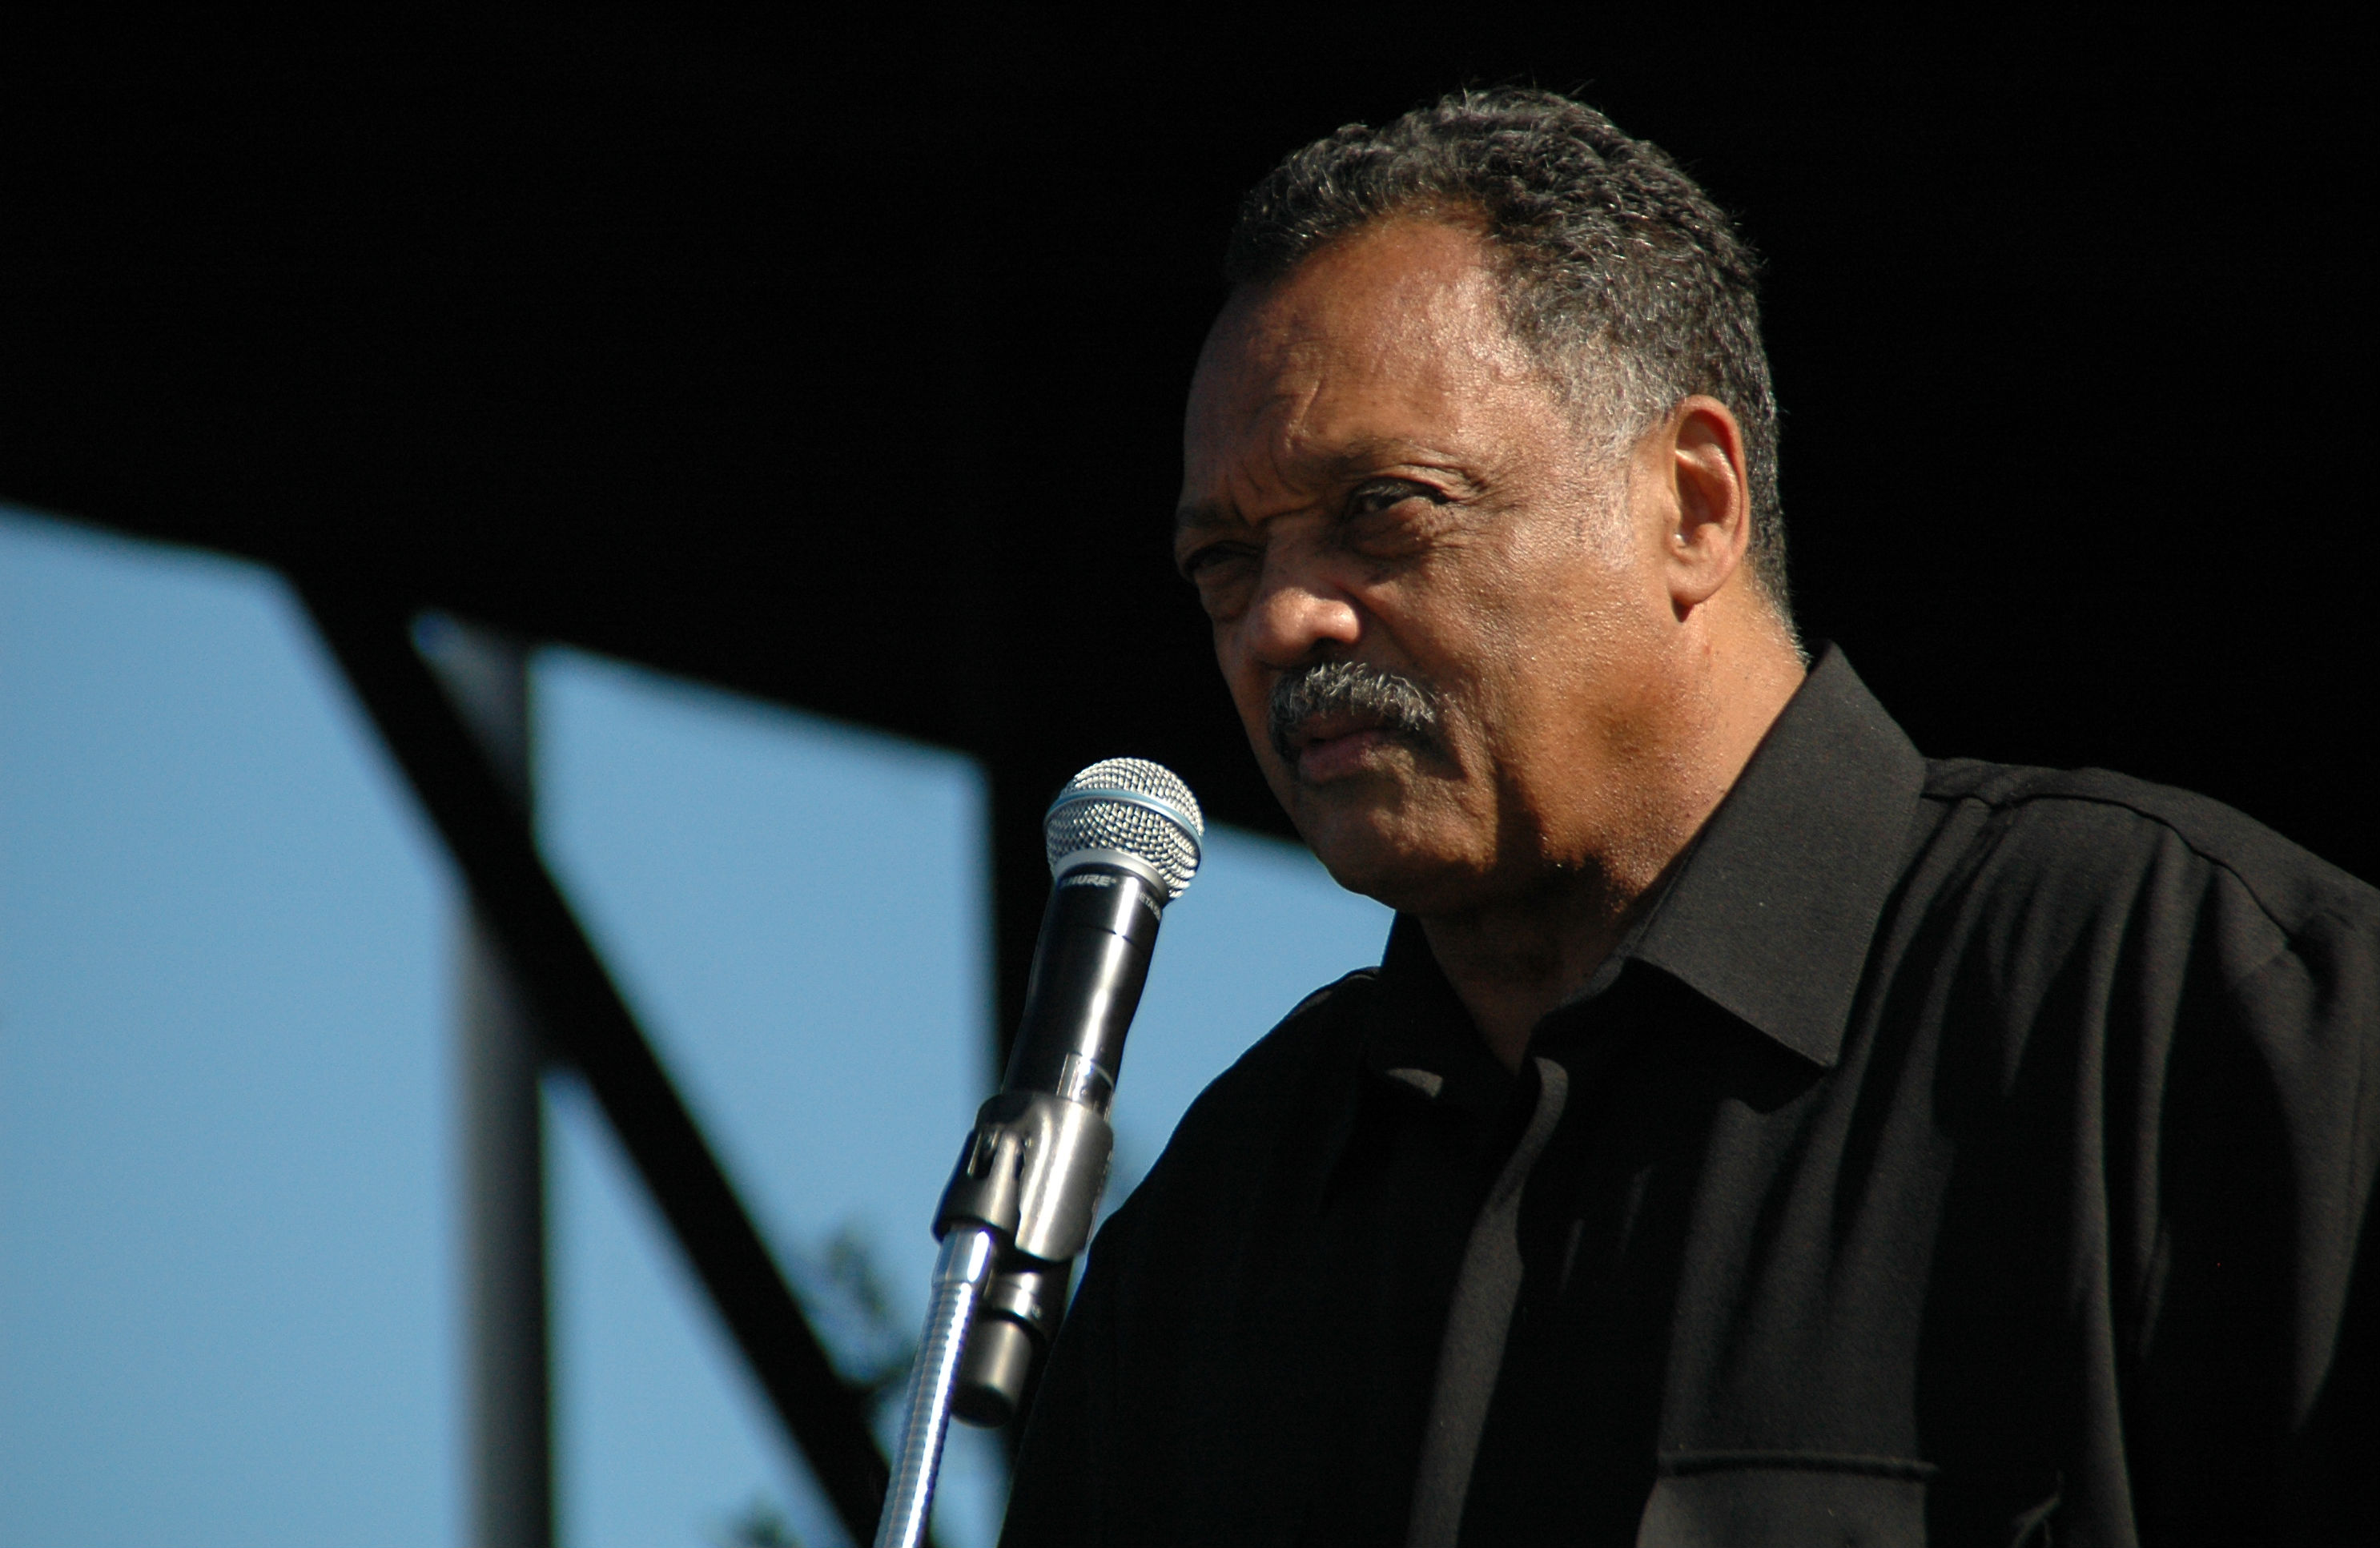 How to End the Rebirth of the ‘Old Confederacy’ in the ‘New South’: An Interview With the Reverend Jesse Jackson